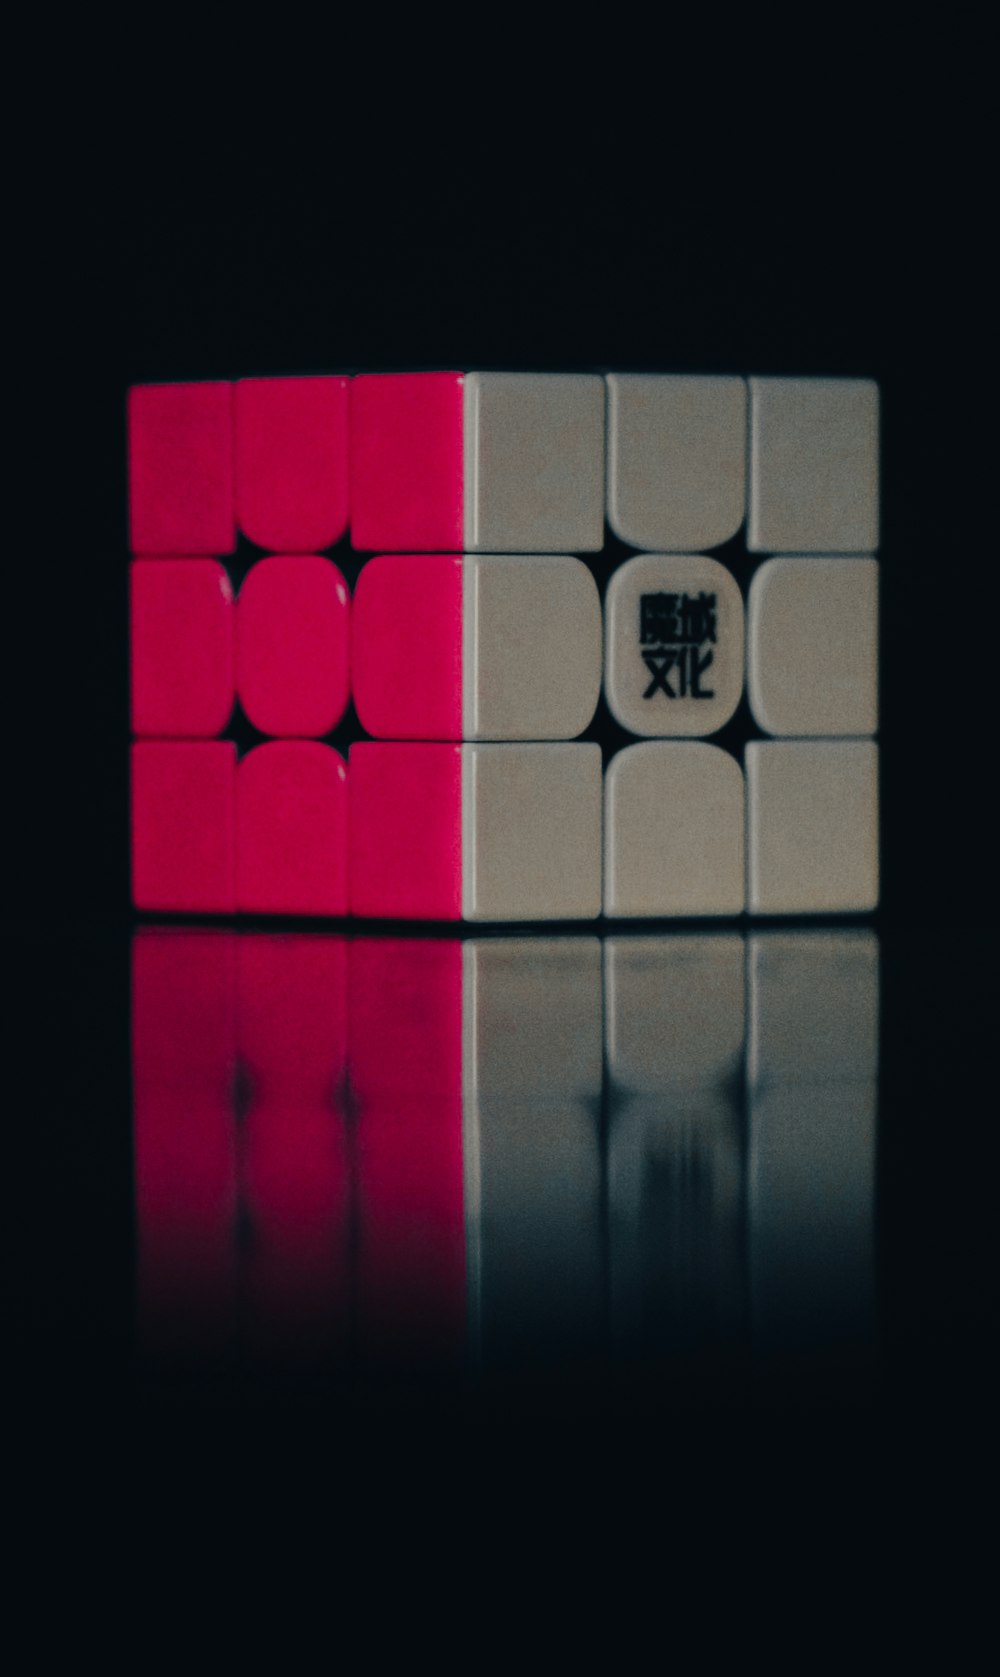 a pink and white cube sitting on top of a reflective surface